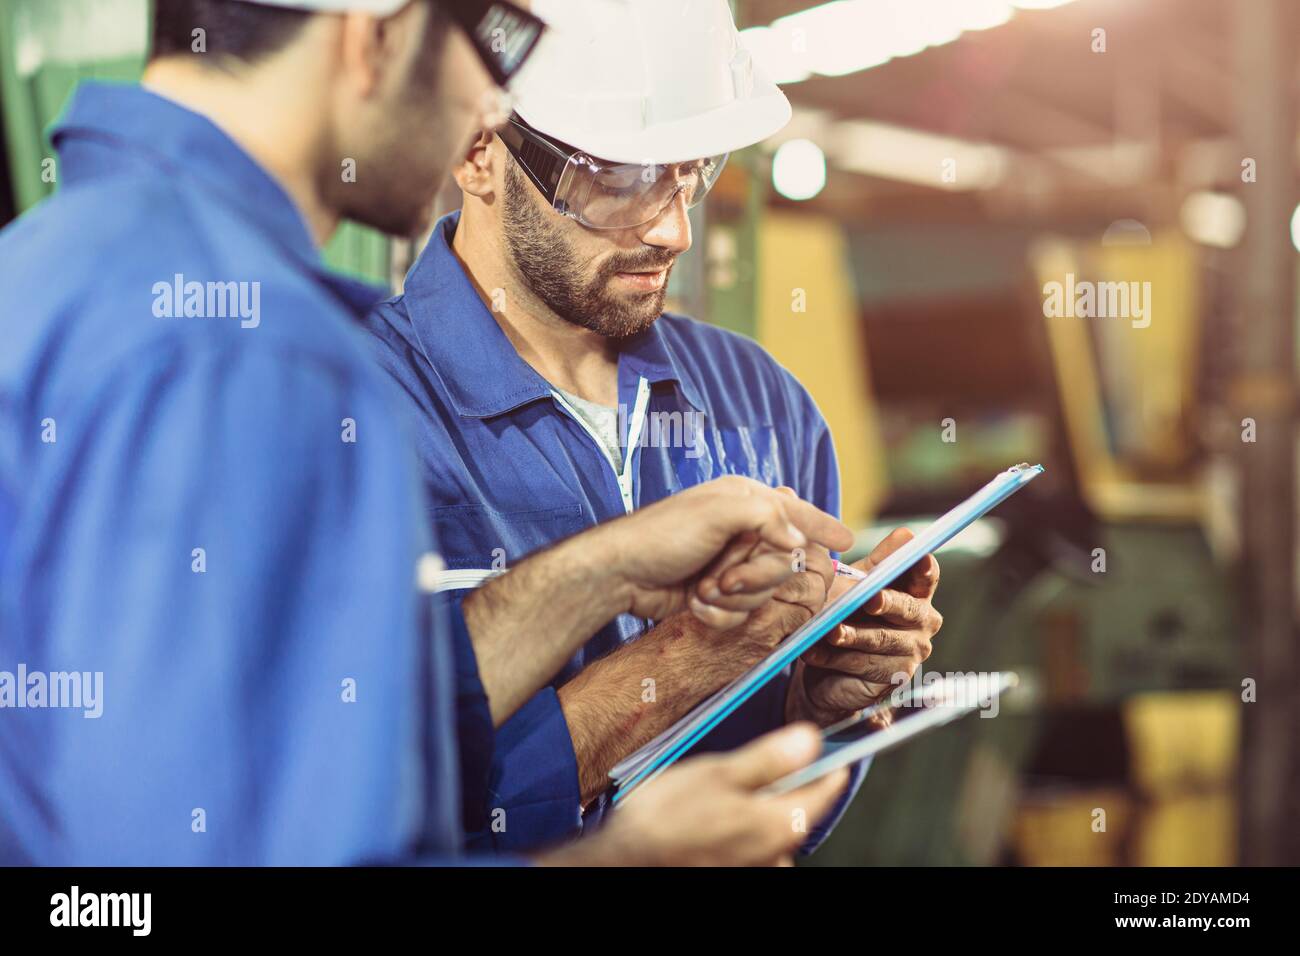 Worker working team work help care support together with safety uniform in industry factory. Stock Photo